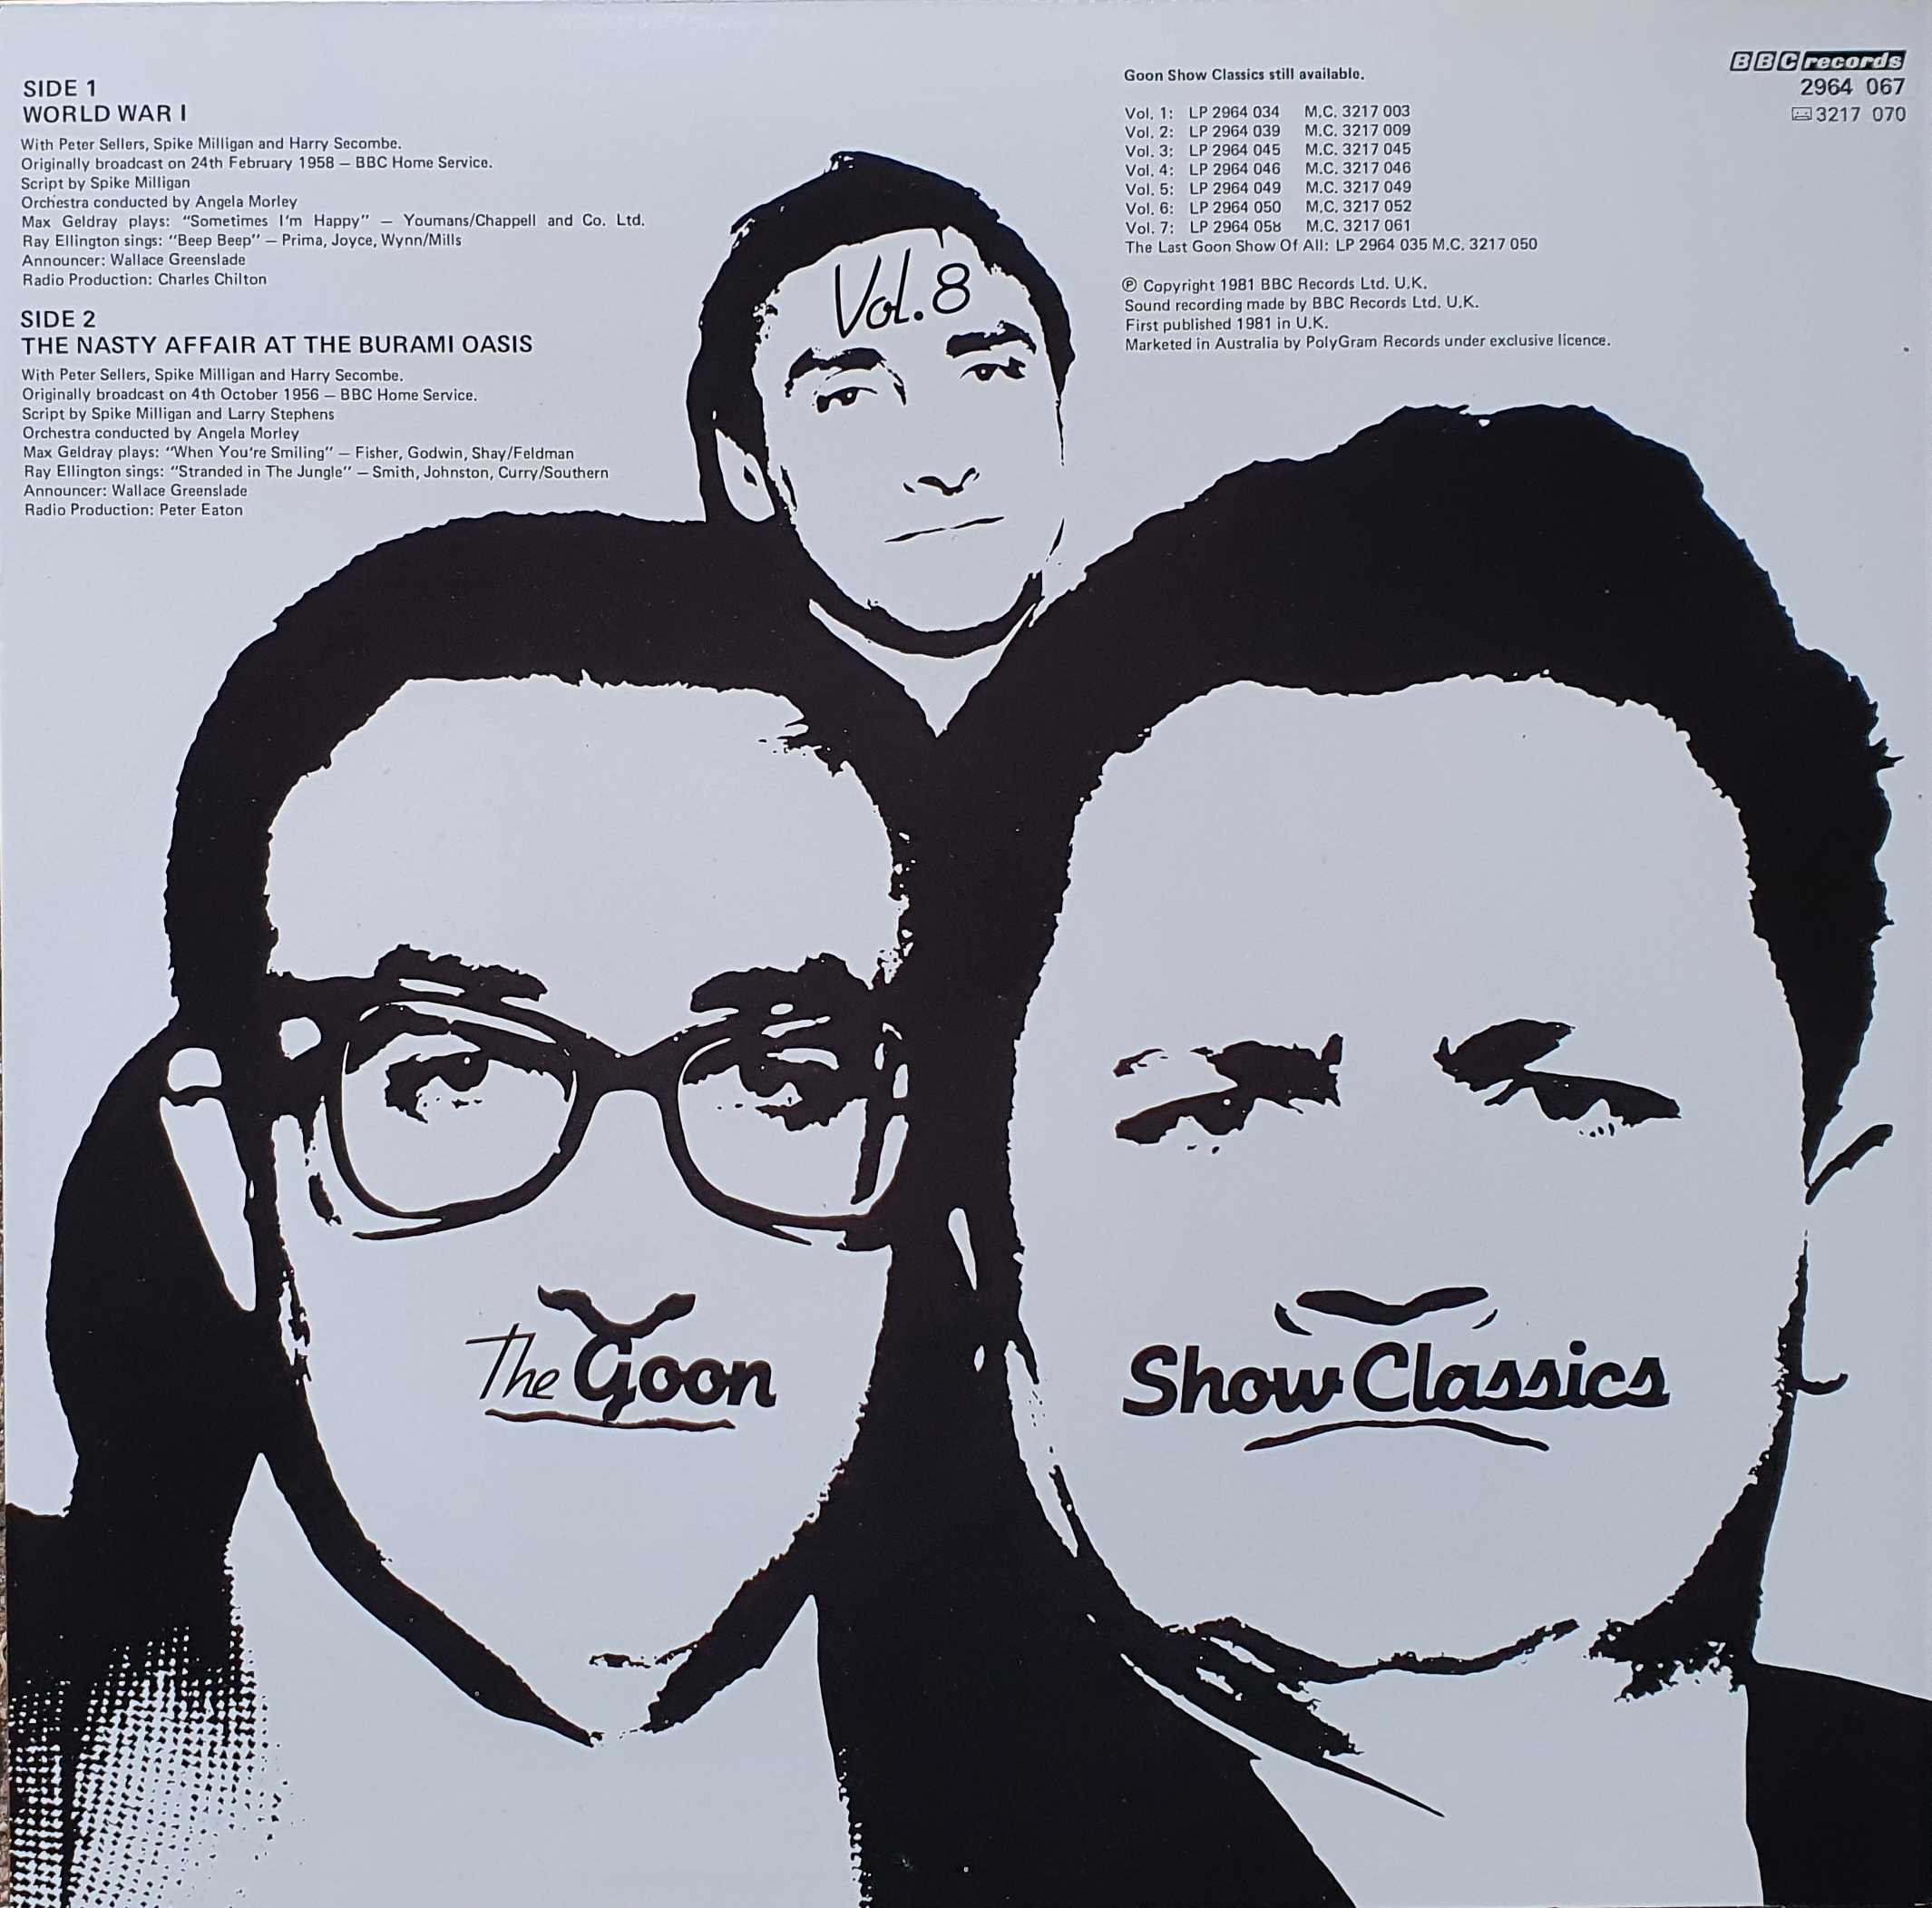 Picture of 2964 067 Goon Show classics vol. 8 by artist The Goon Show from the BBC records and Tapes library